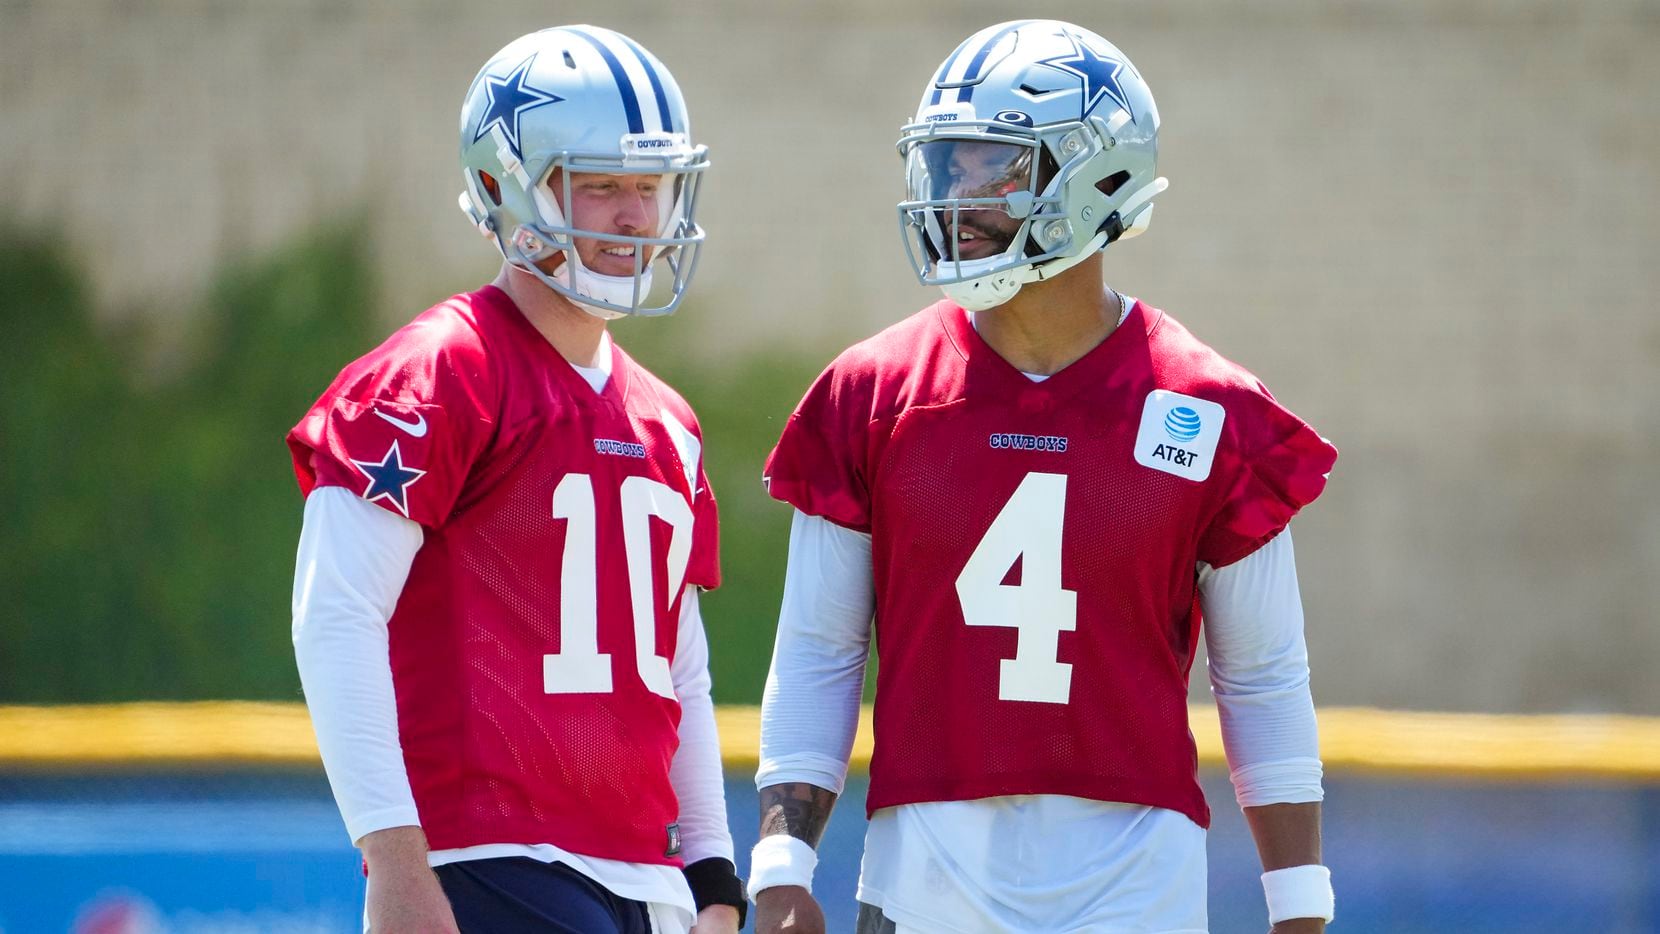 Dak Prescott and Cooper Rush, the quarterback room that Cam could walk into if signed by the Cowboys